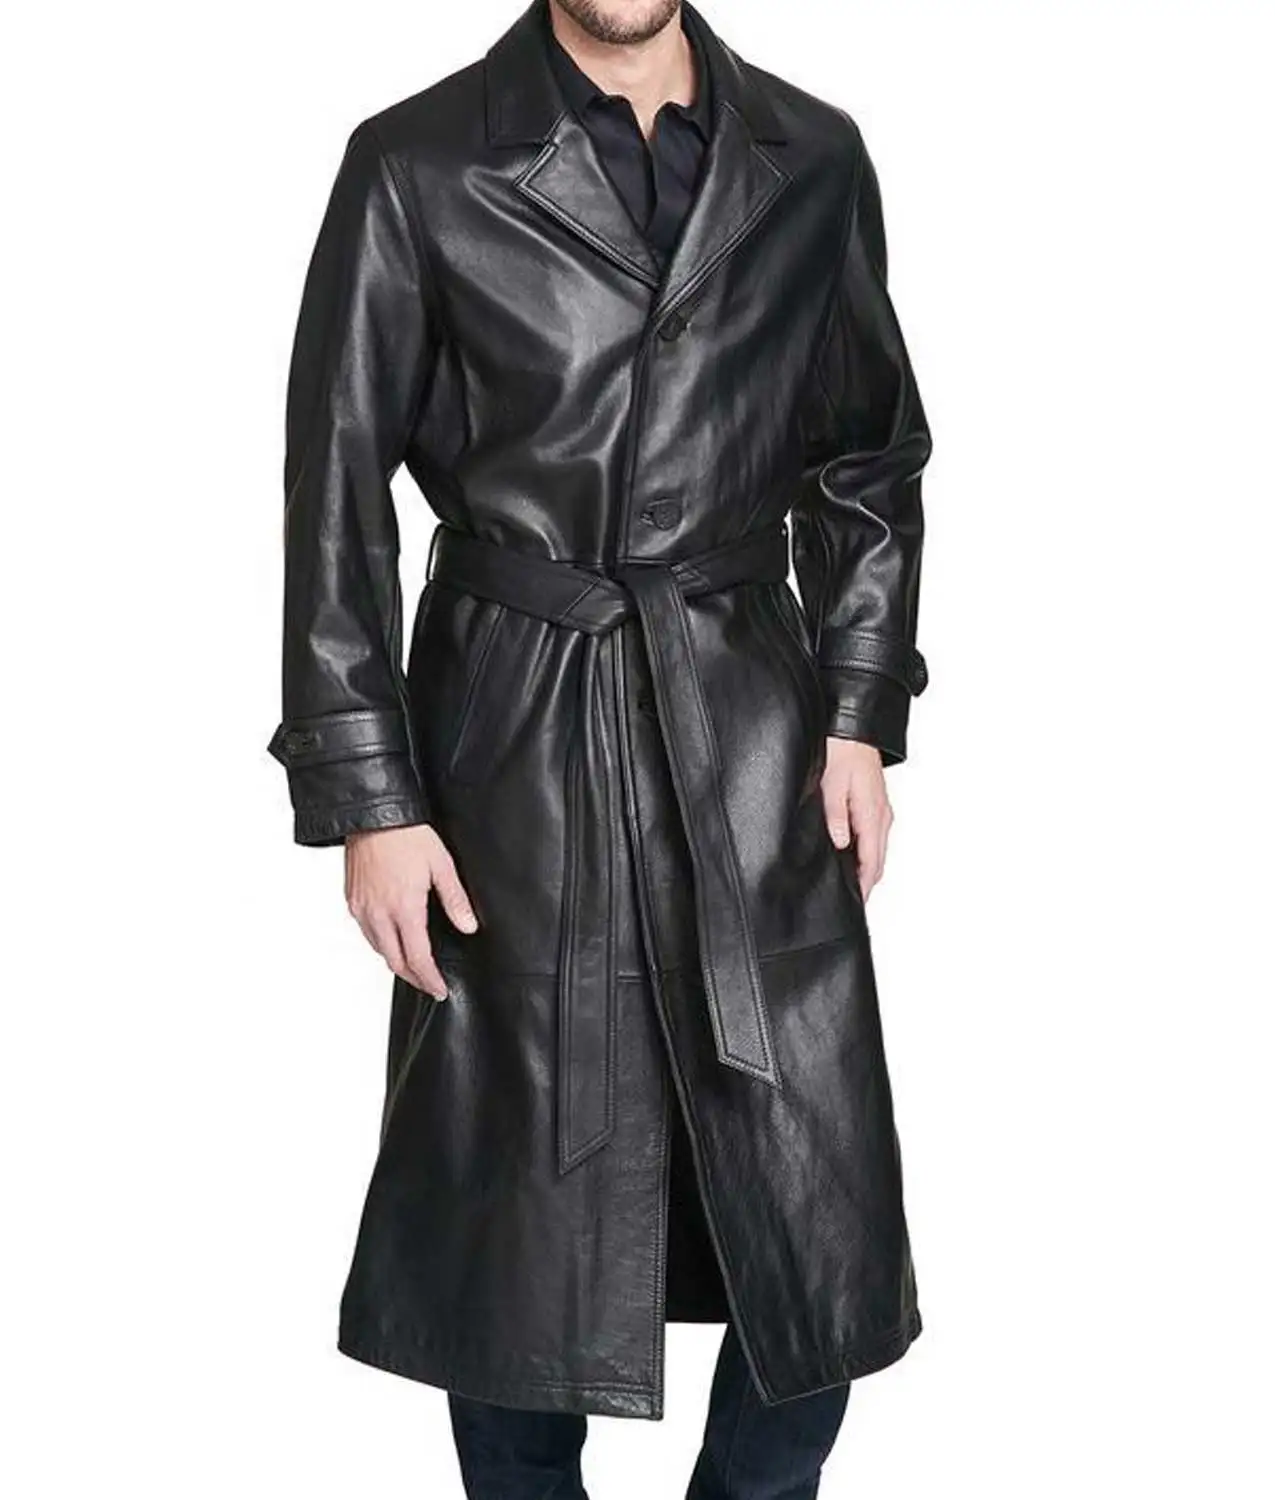 Men's Winter Button Closure Belted Black Leather Trench Coat